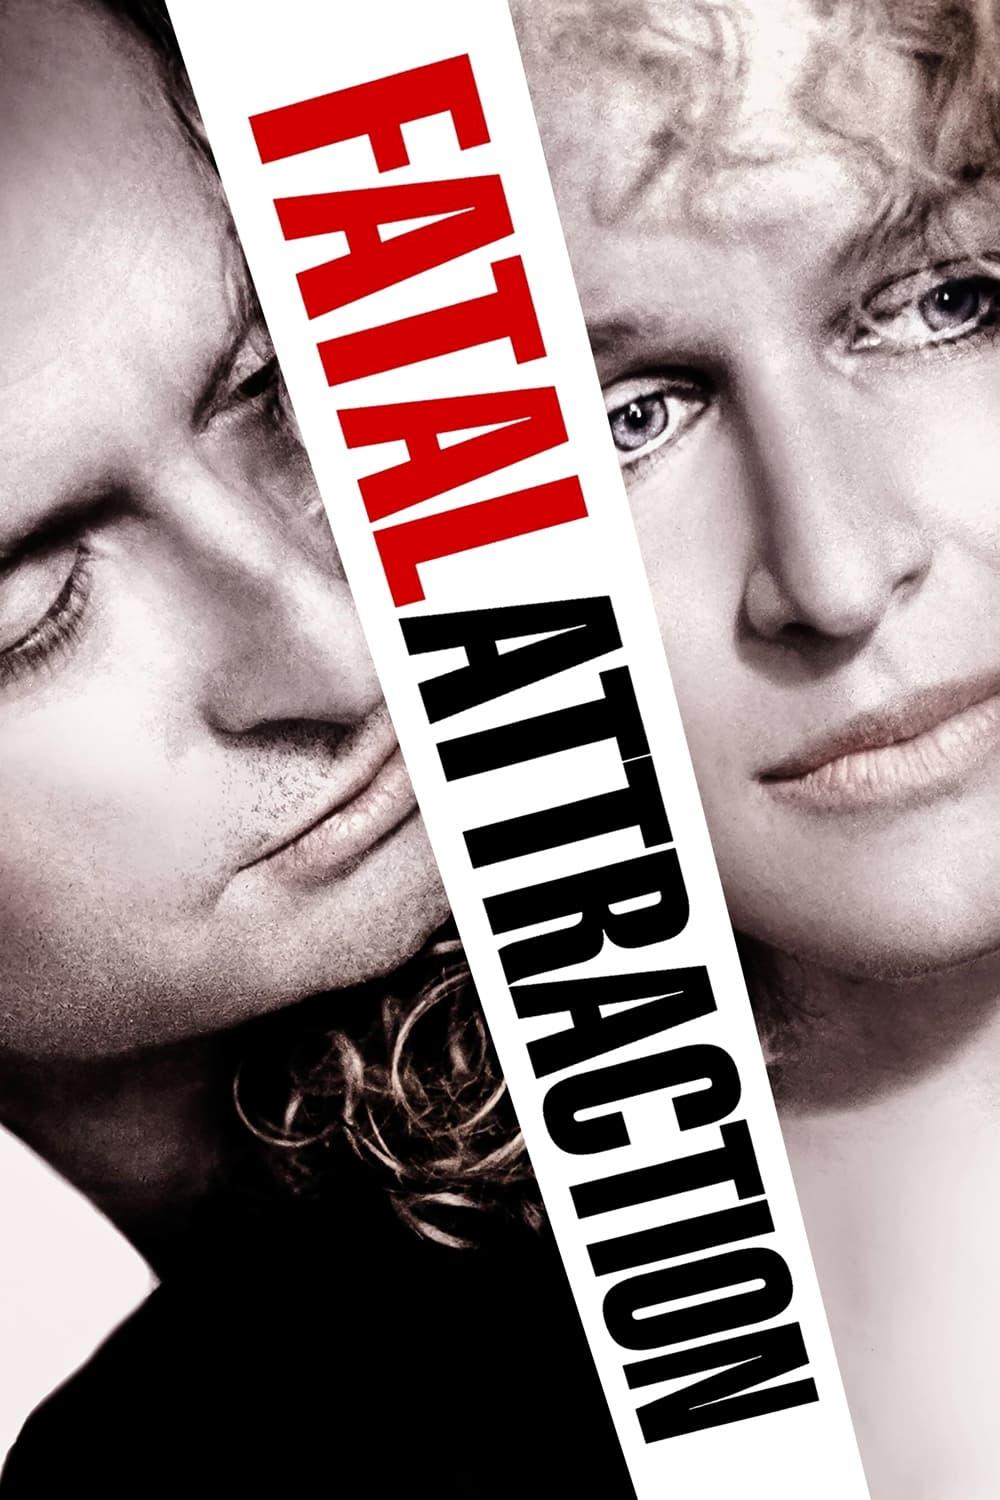 Fatal Attraction poster